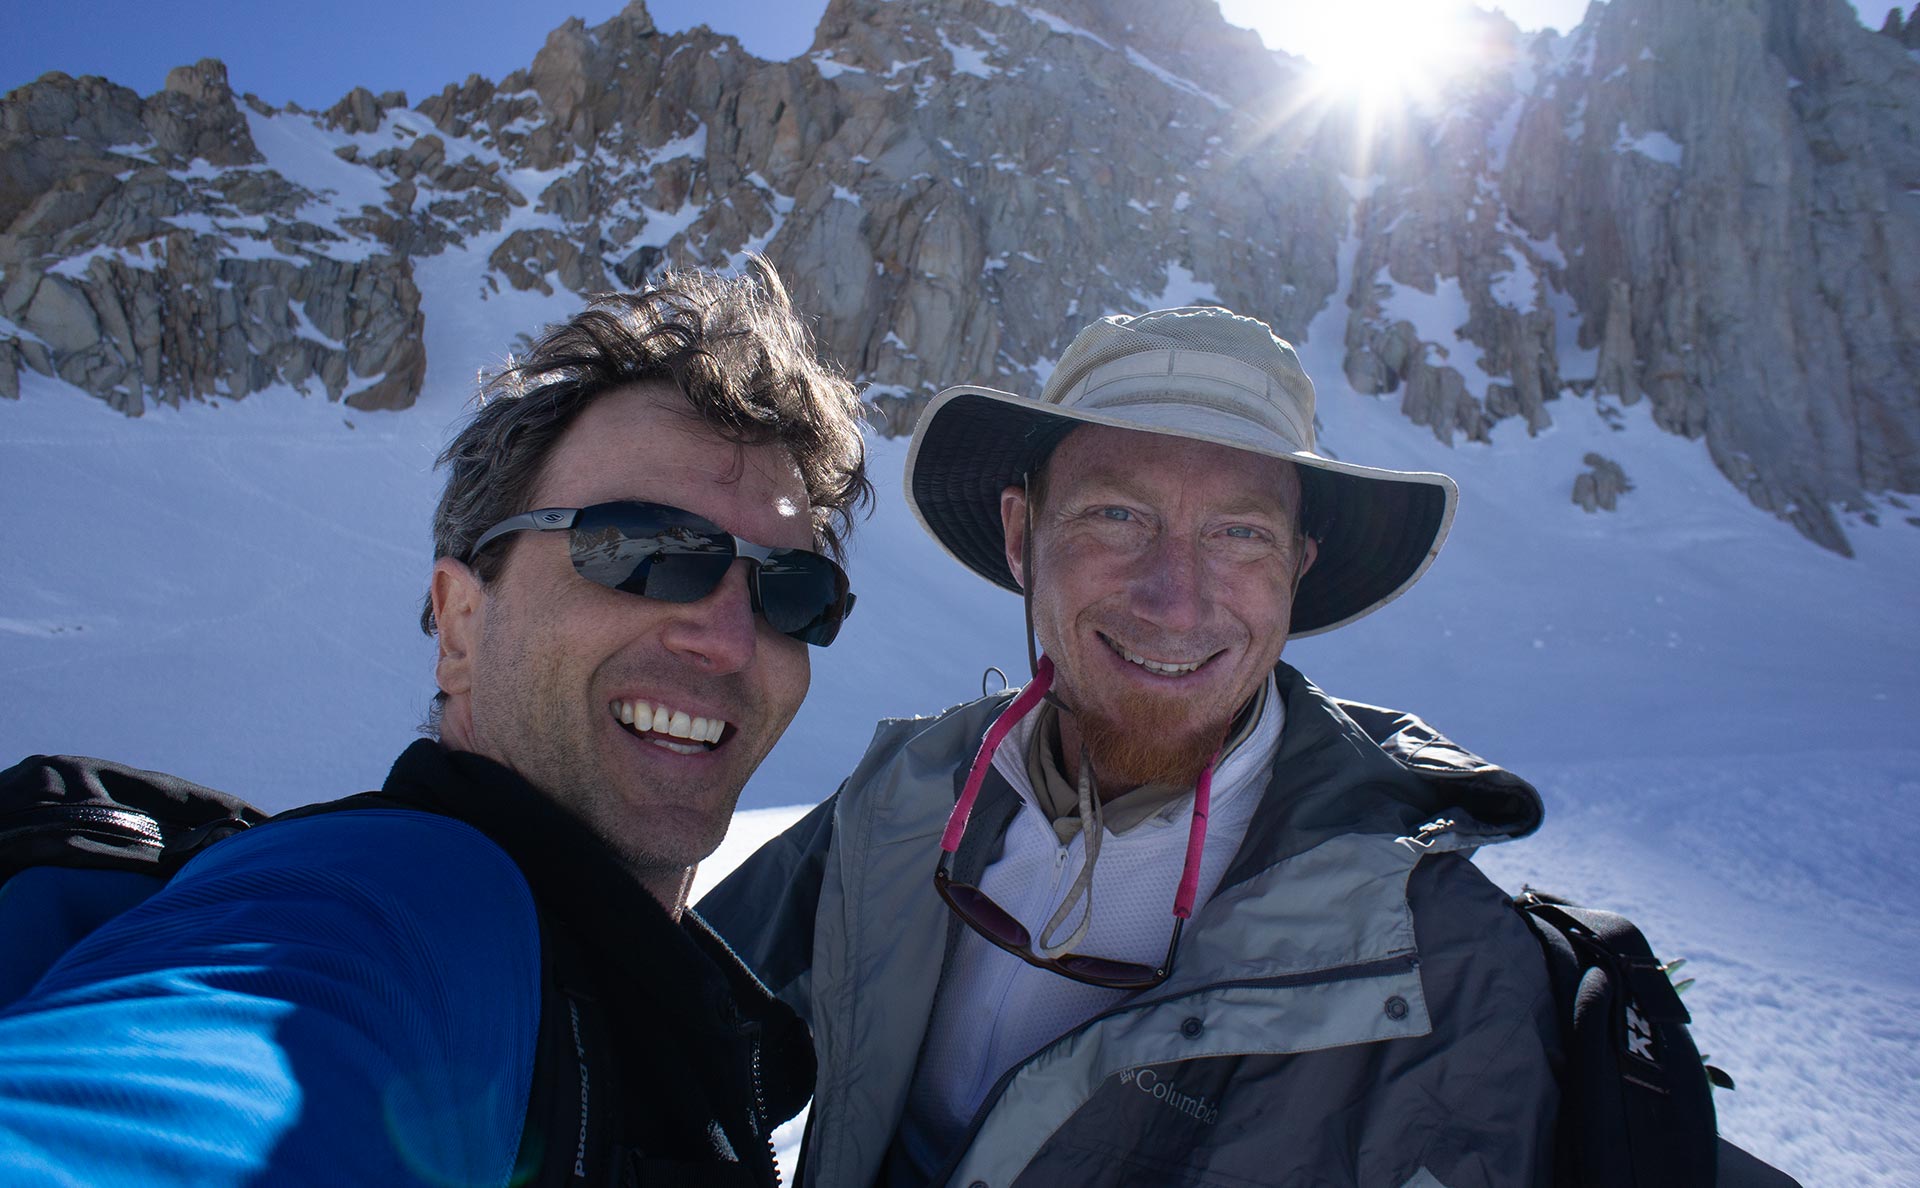 Andy Lewicky and David Braun at the base of Mount Muir's East Buttress